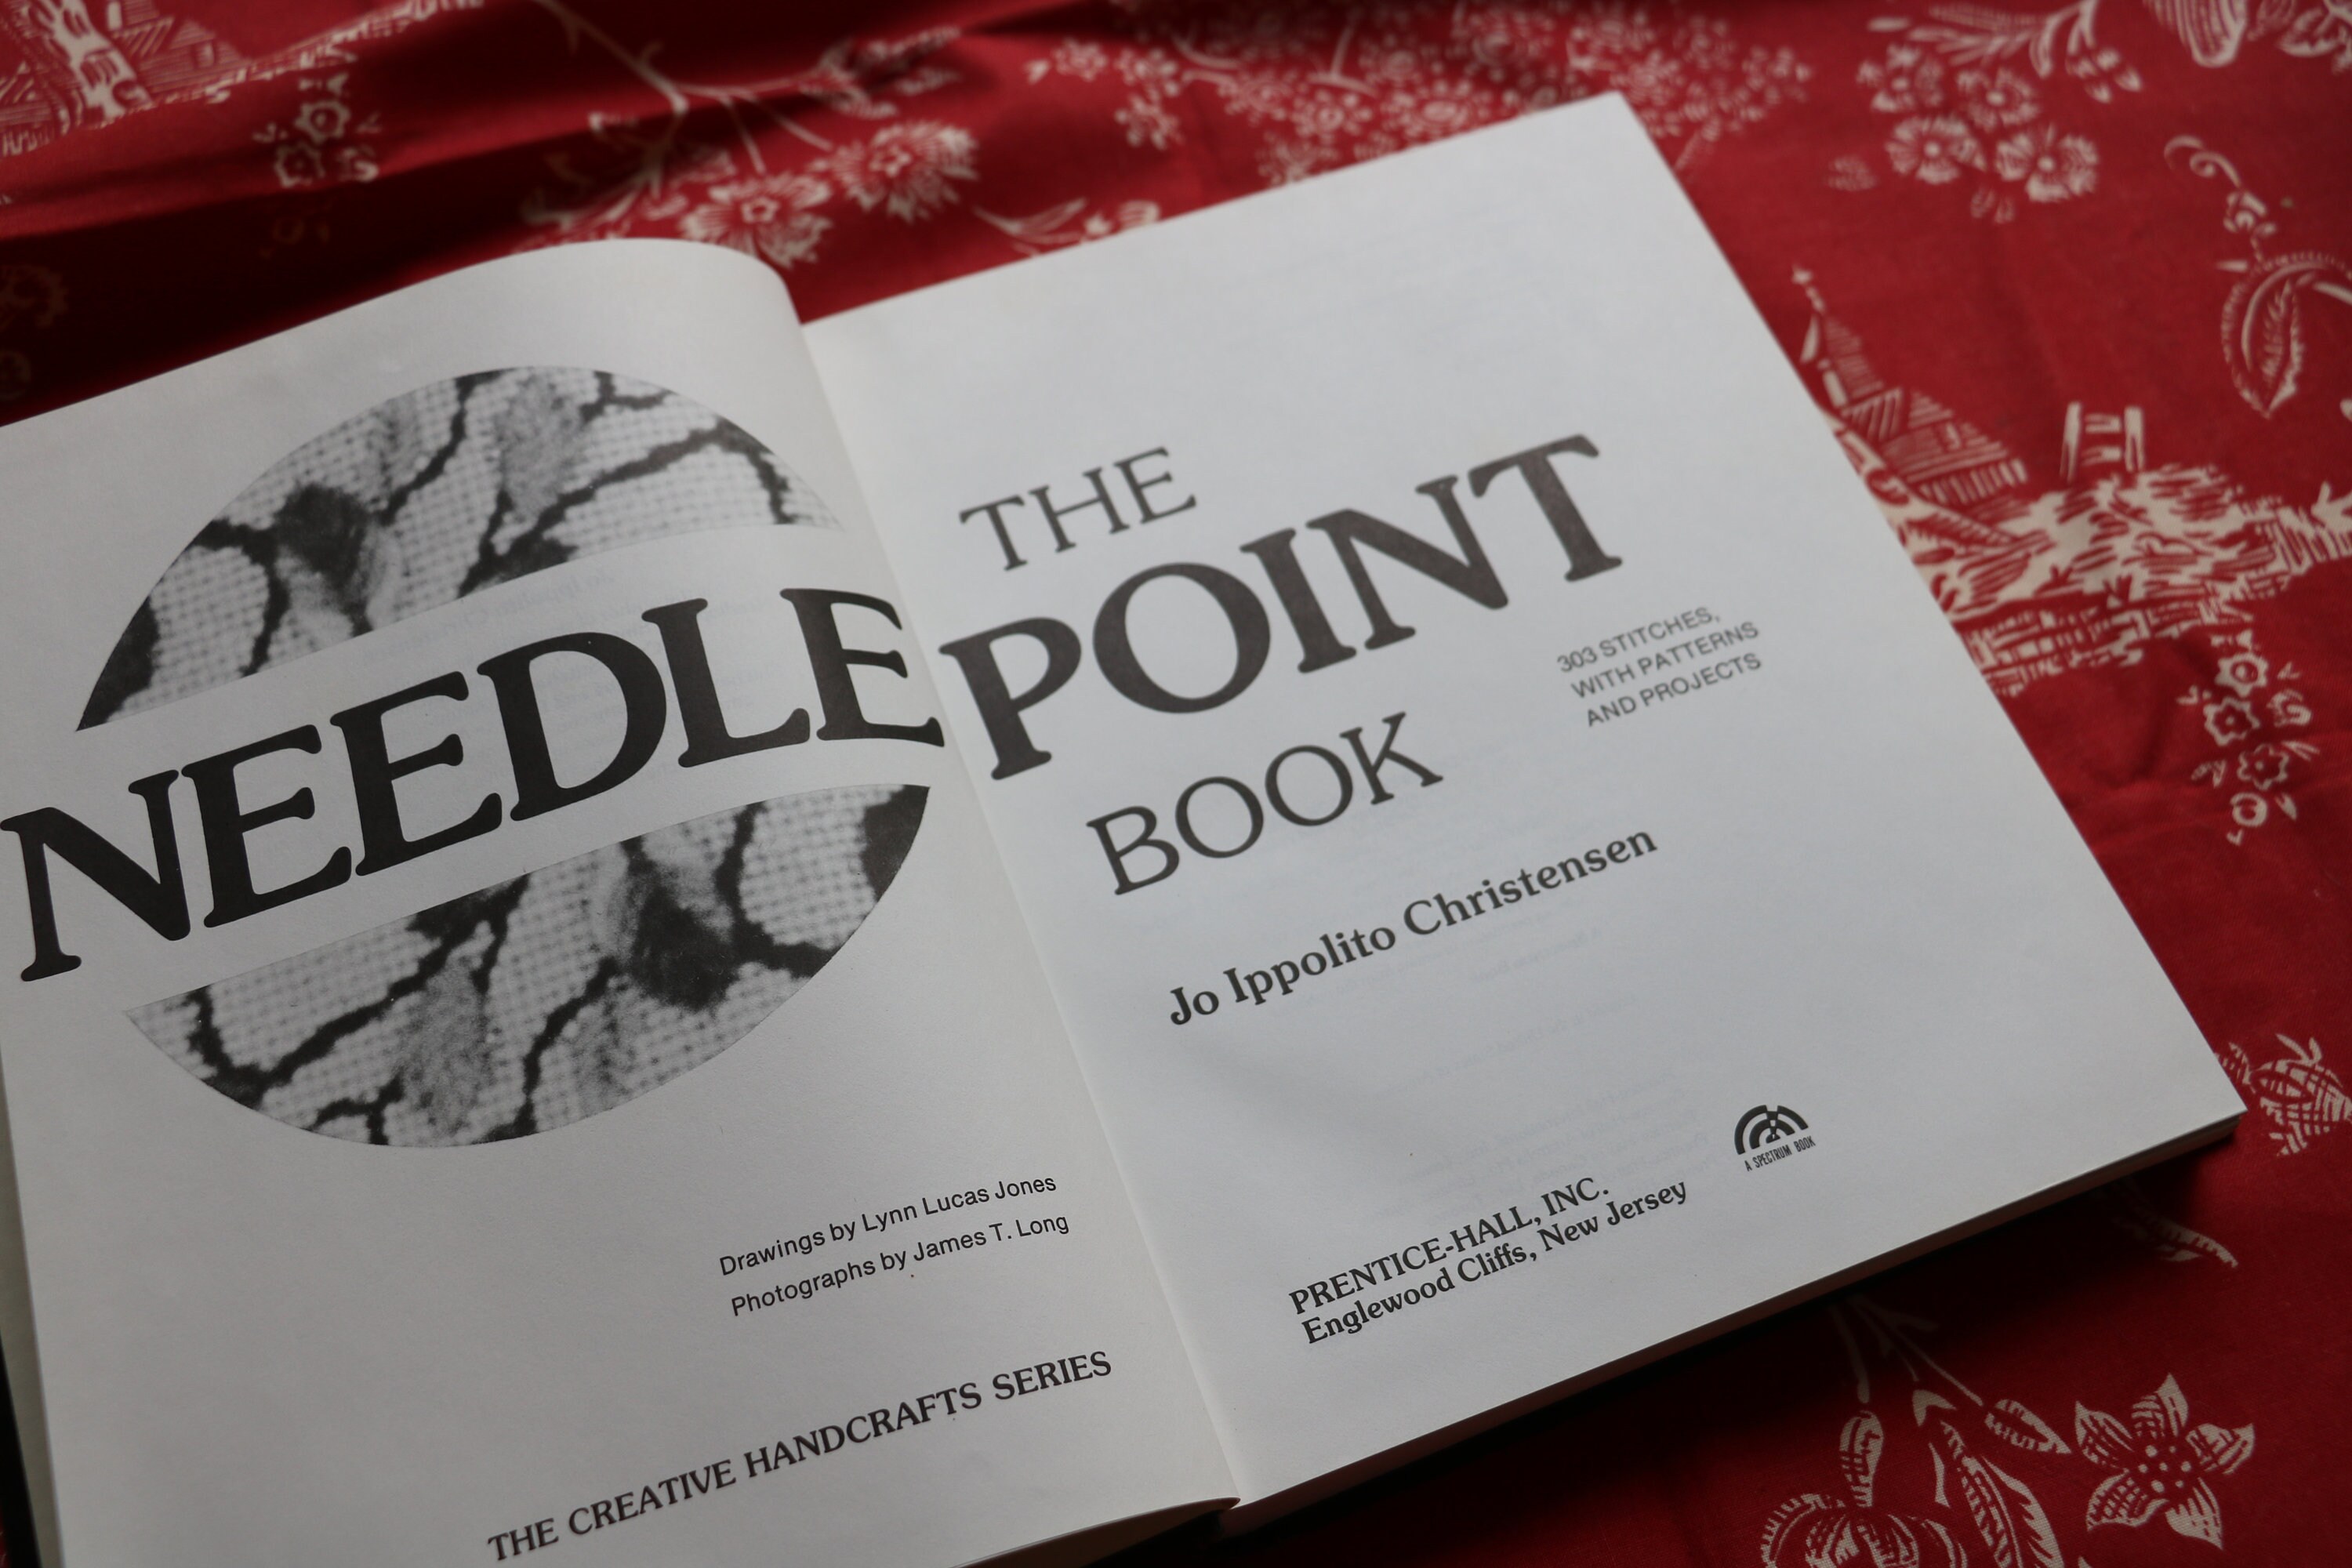 Vintage Book the Needlepoint Book by Jo Ippolito Christensen 